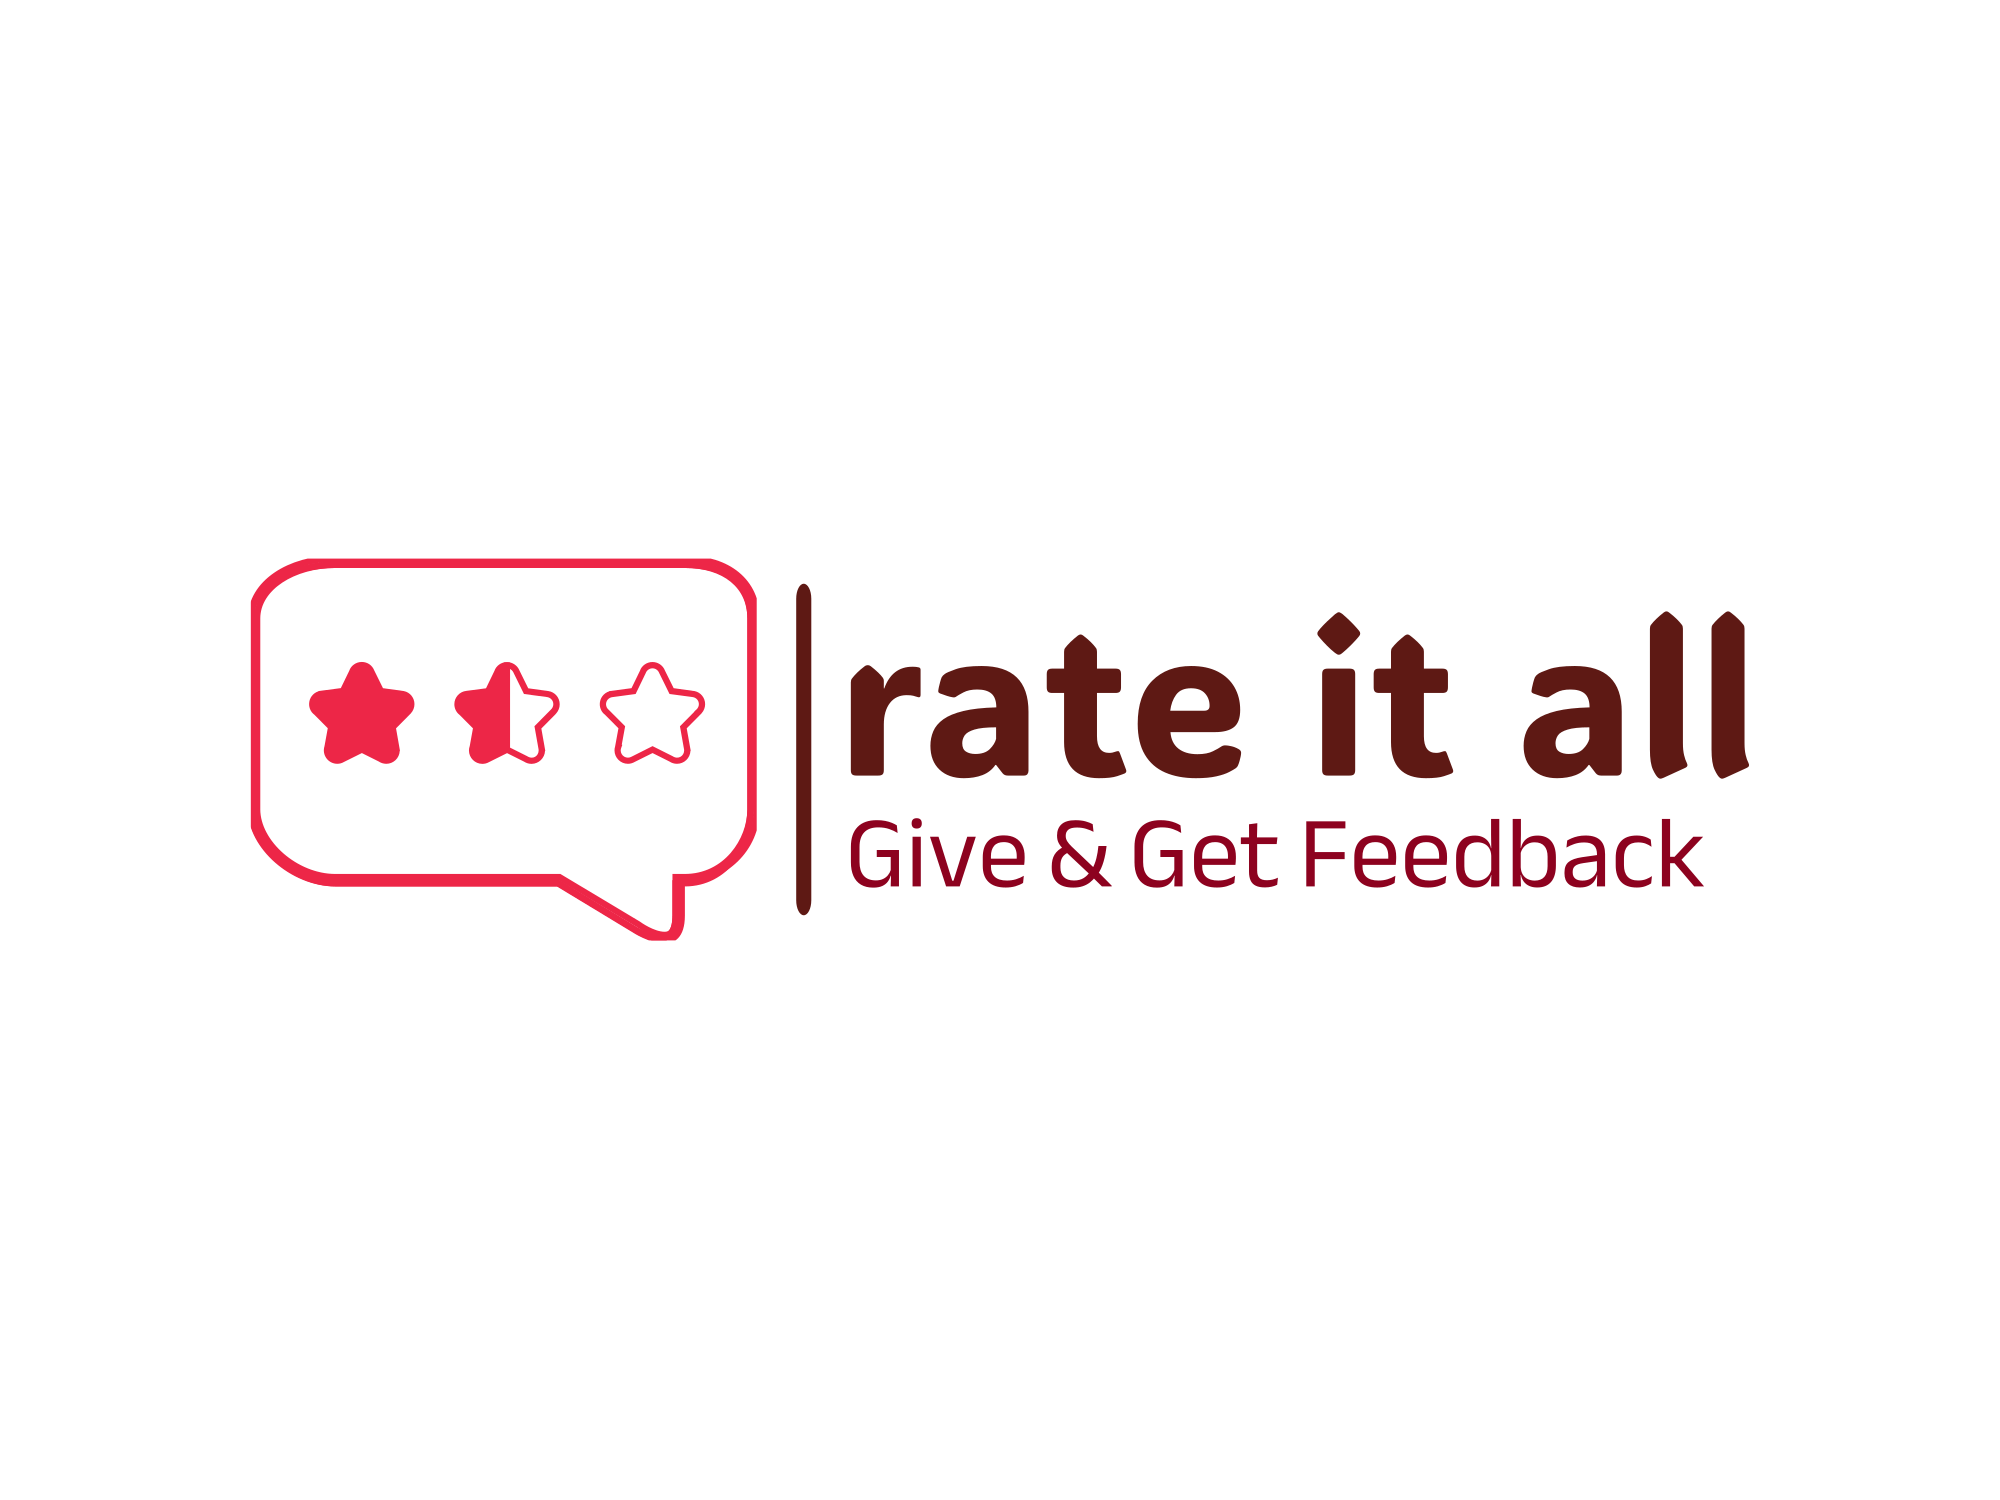 rate it all high resolution logo